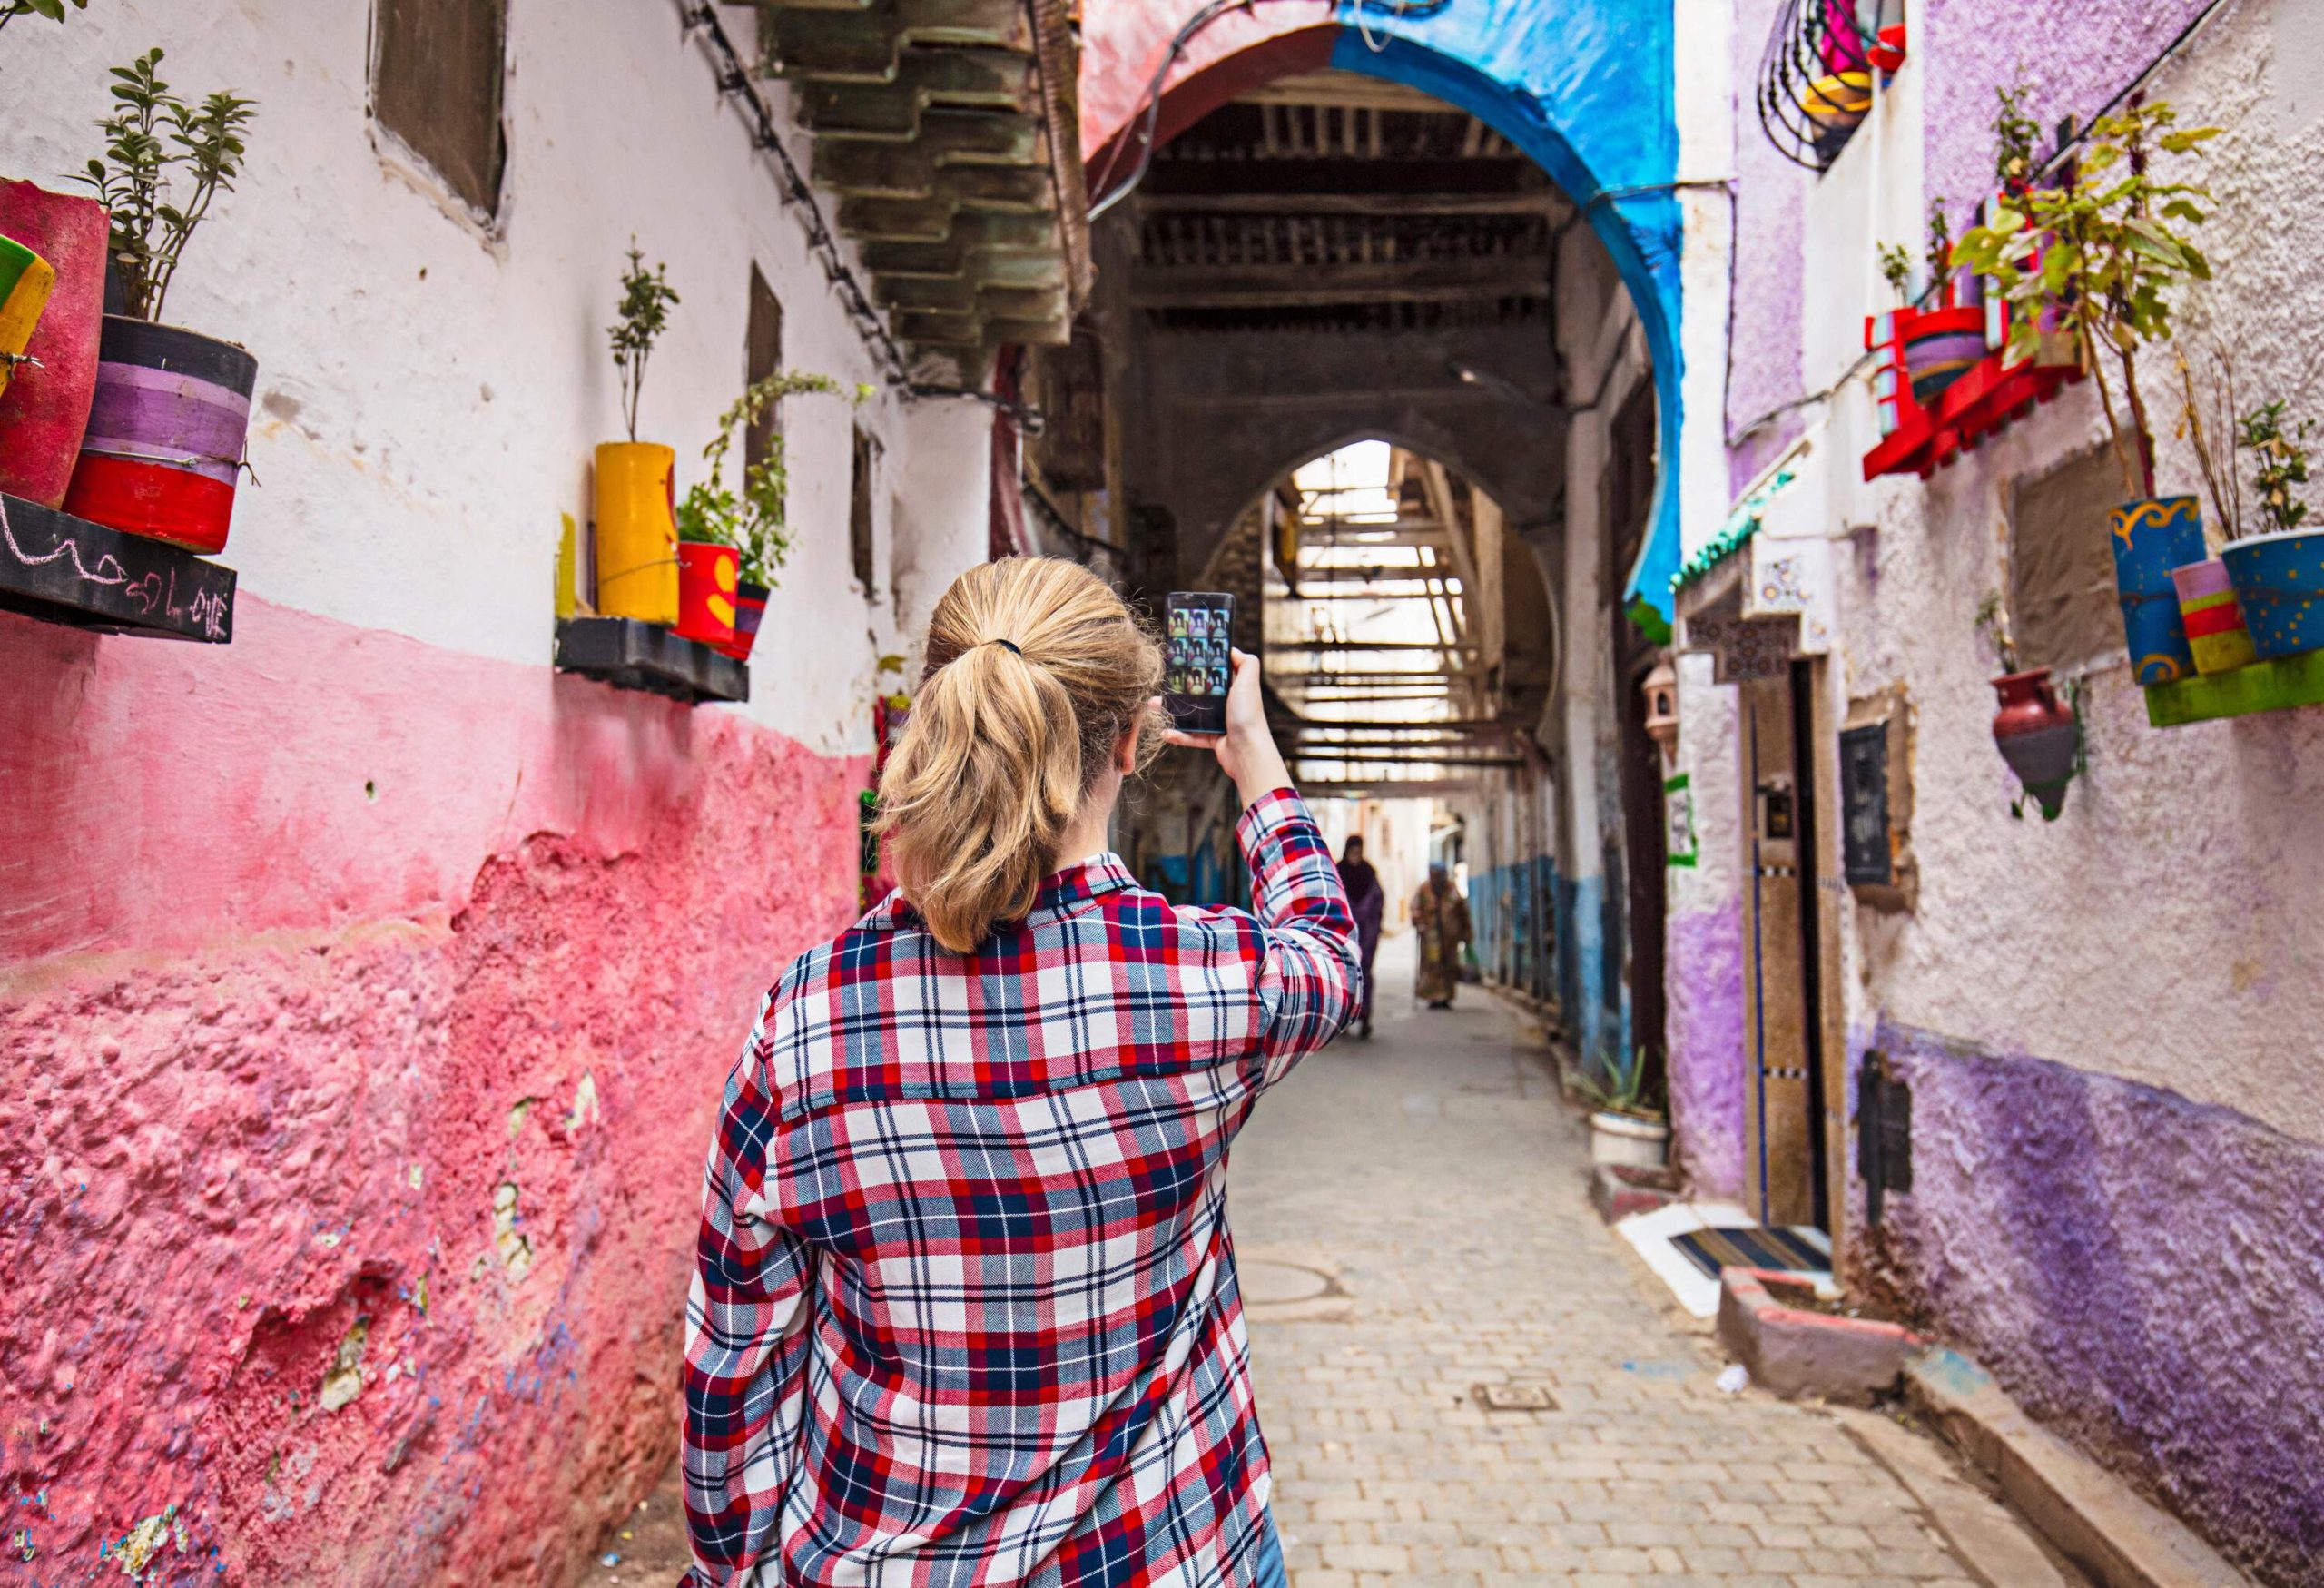 A woman in a chequered shirt uses a phone to take photos of a narrow alley with flower planters on the walls.